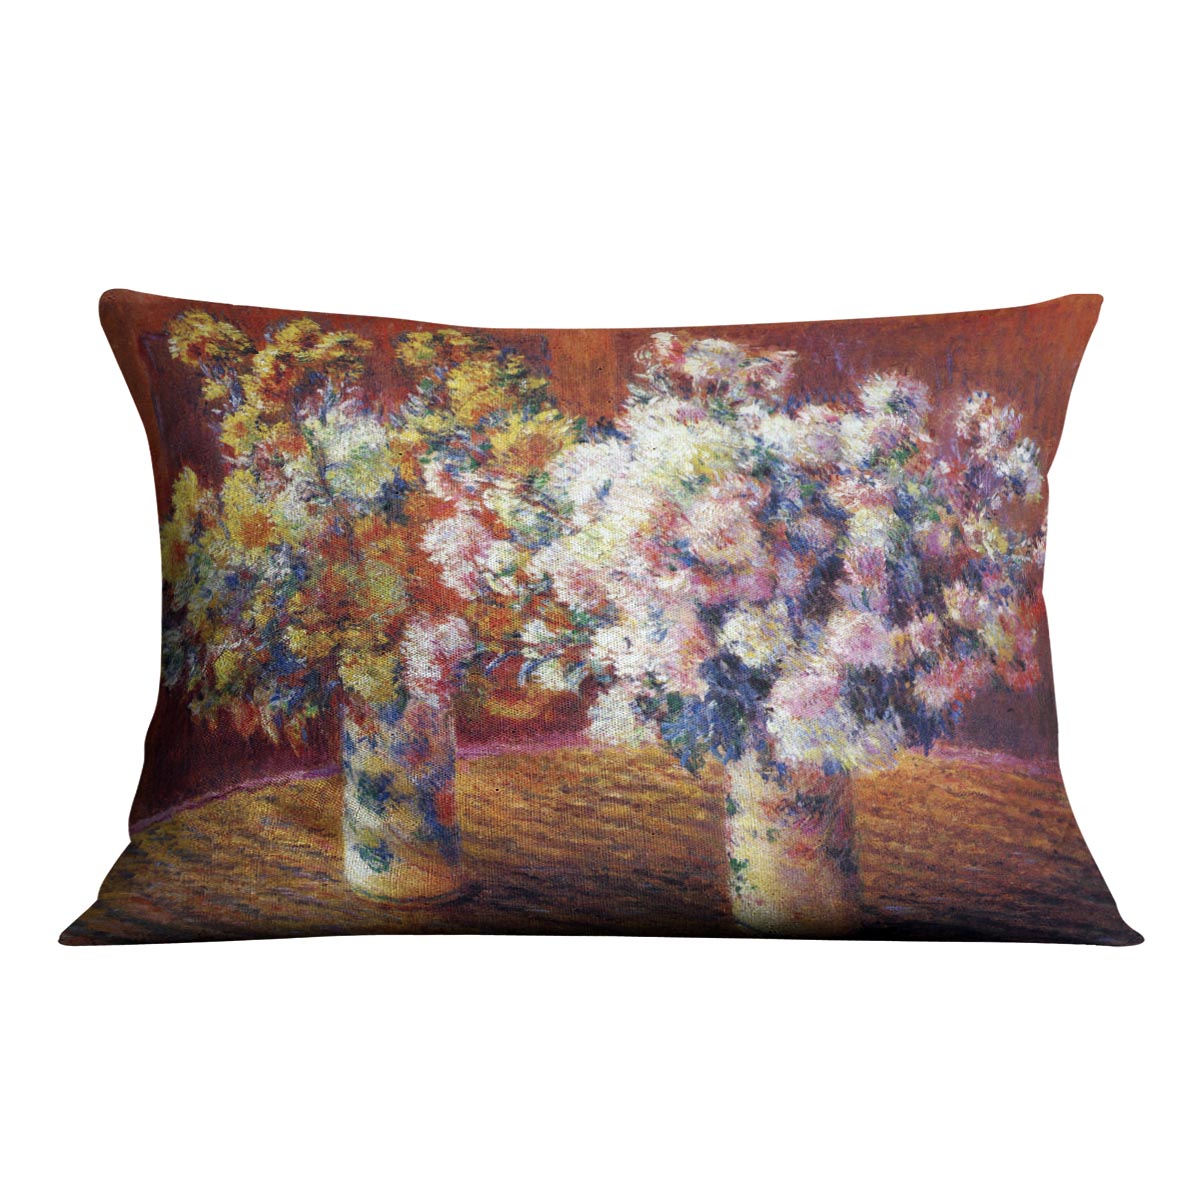 Two vases with Chrysanthemums by Monet Cushion